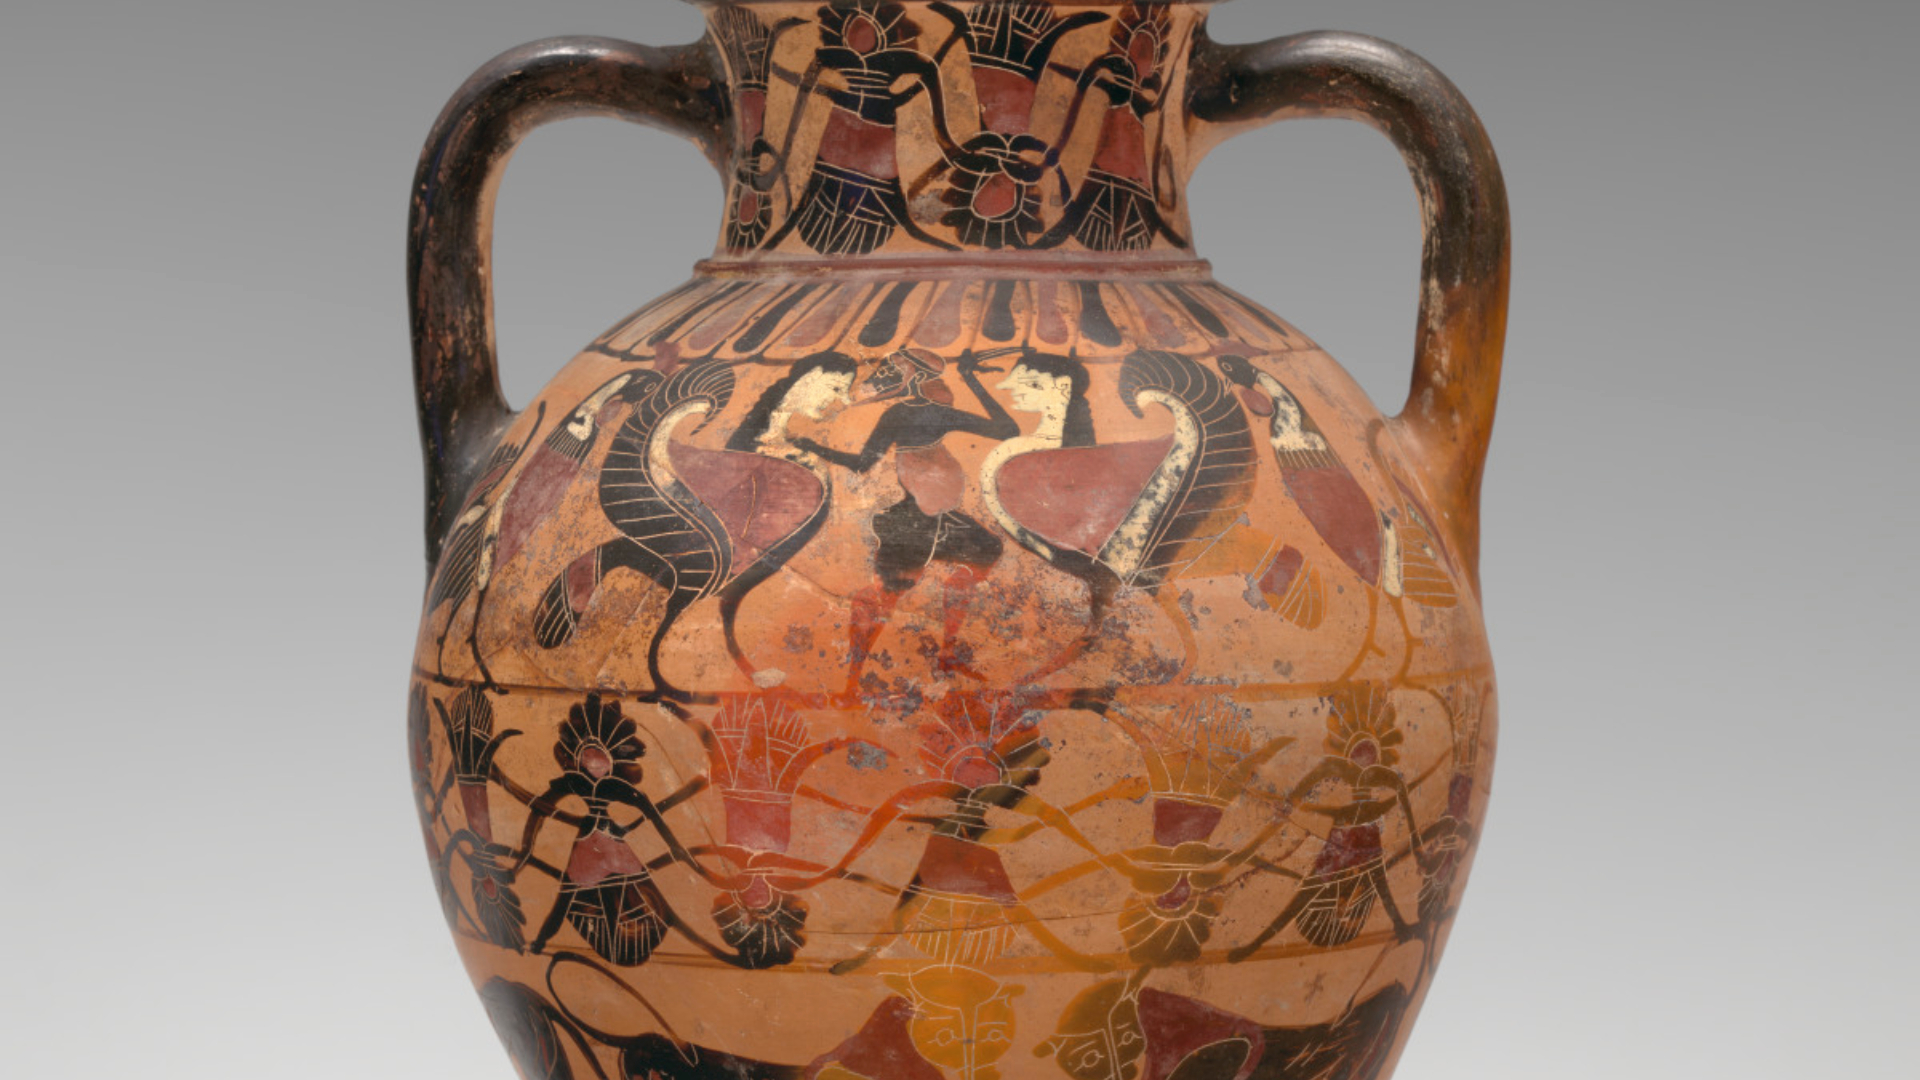 Attic Black-Figured Tyrrhenian Neck-Amphora (detail), ca. 560 BC, attributed to Goltyr Painter (Greek, active 6th century BC), terracotta, 15 1/4 in. high. Virginia Museum of Fine Arts, Adolph D. and Wilkins C. Williams Fund and Jack and Mary Frable Fund, 2021.582